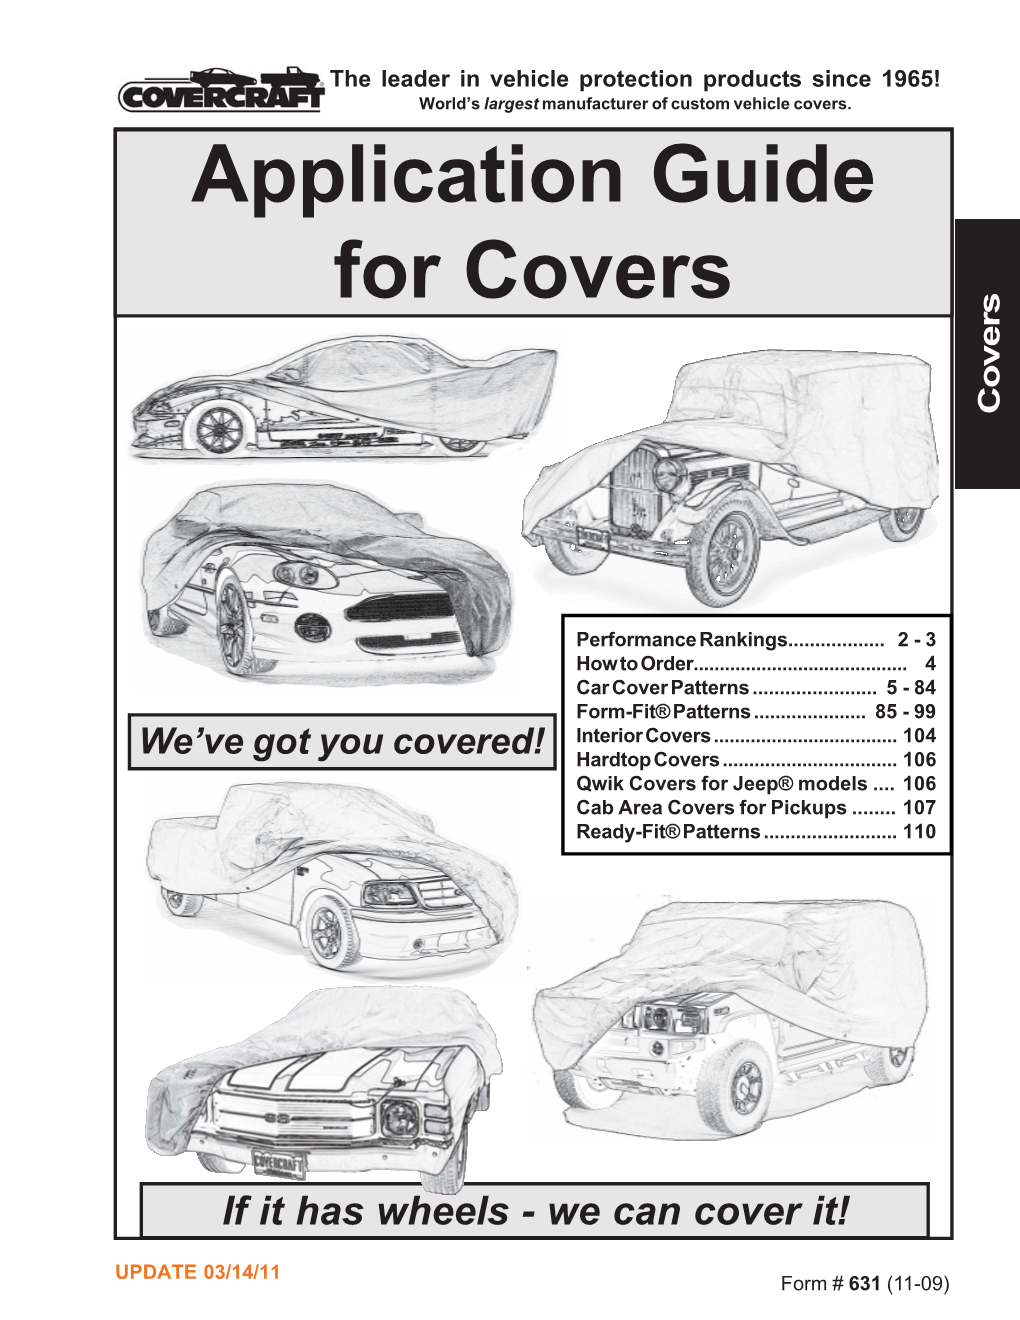 Application Guide for Covers